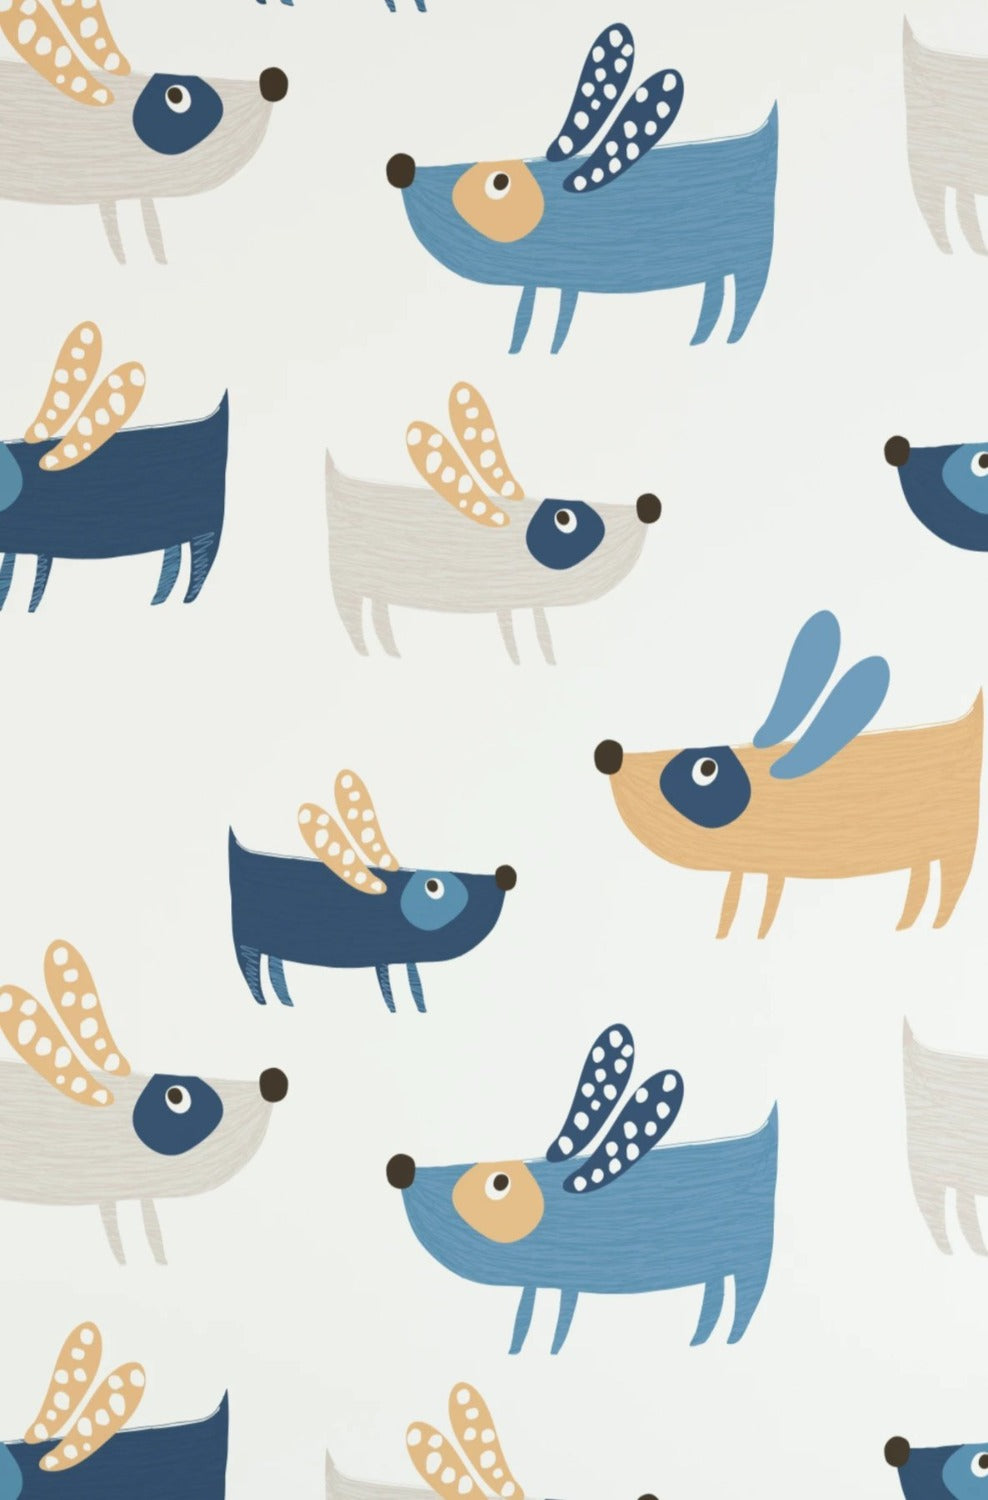 Close-up of flying dogs wallpaper with whimsical dog characters in blue, beige, and white